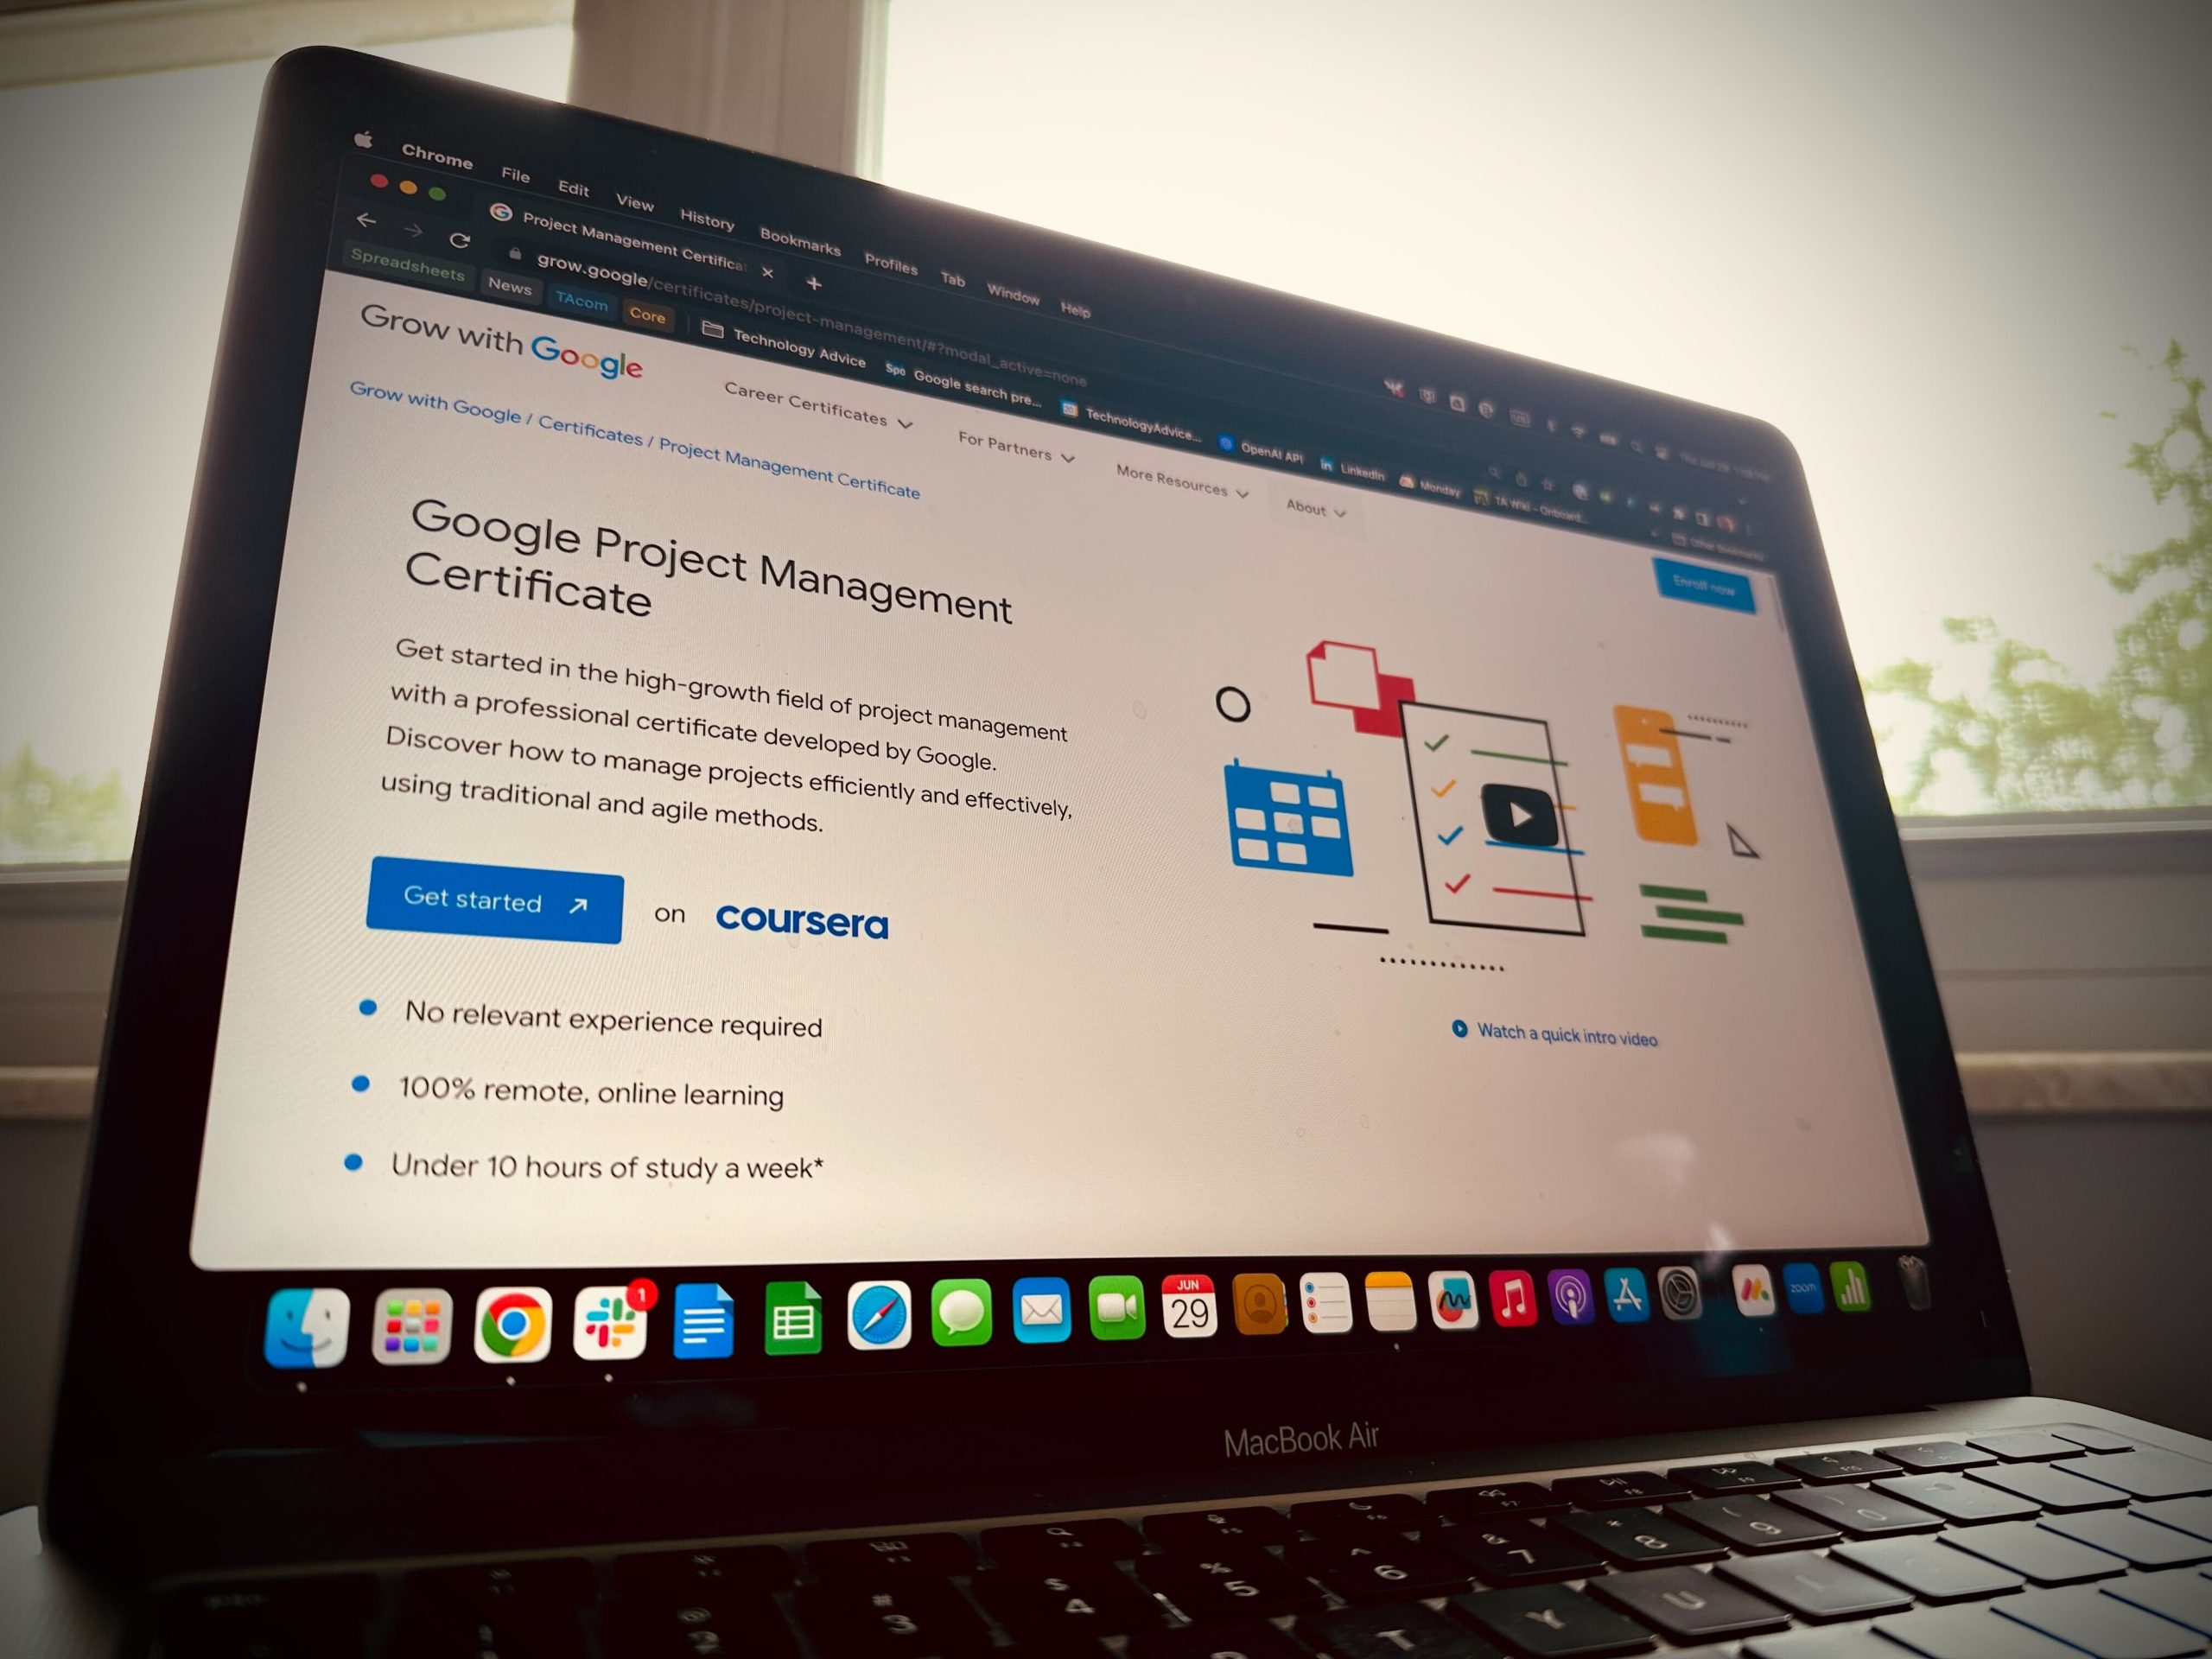 Is the Google Project Management Certificate Worth it?